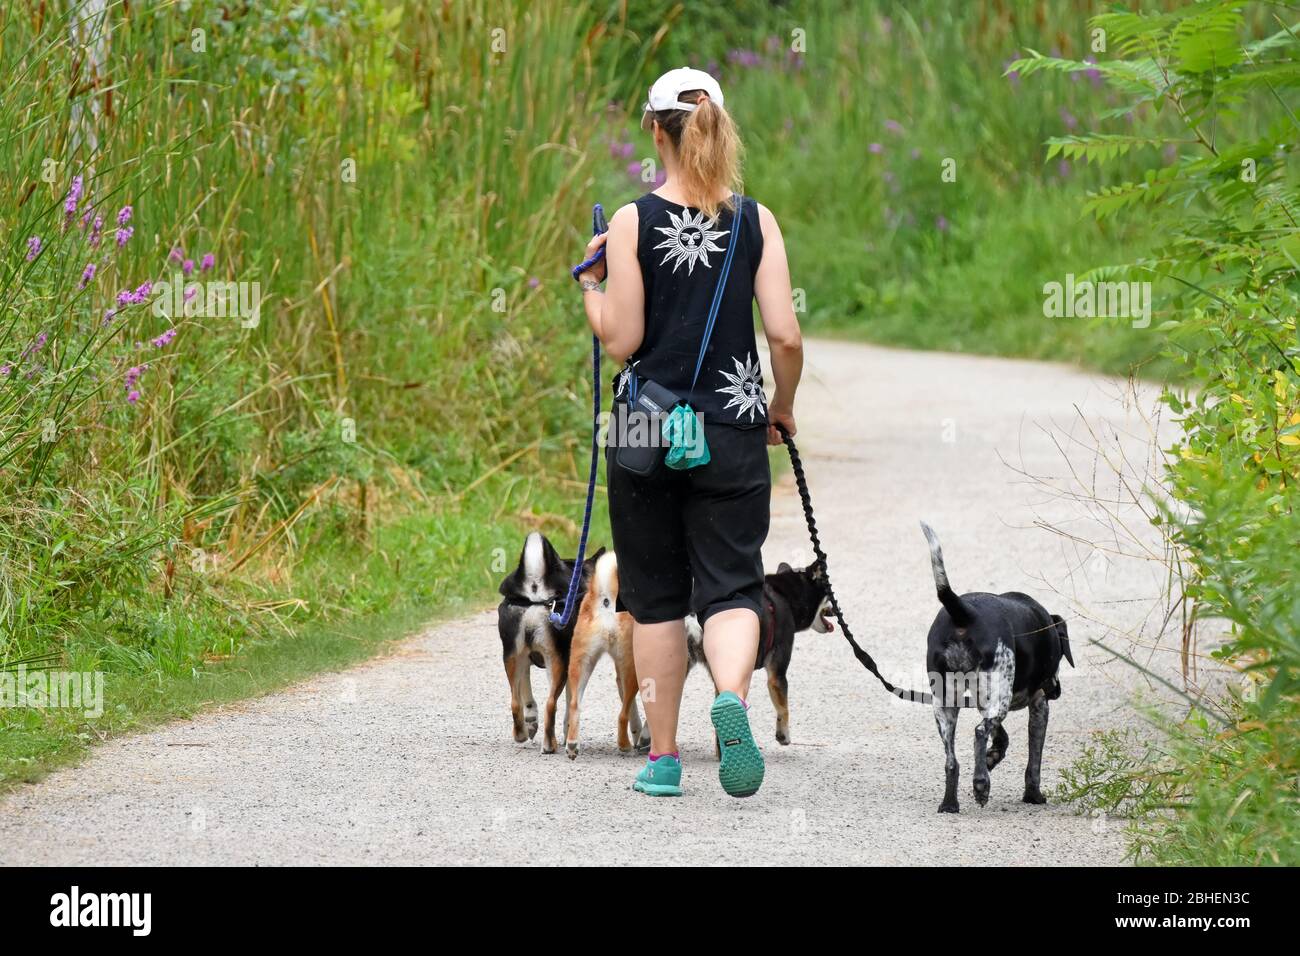 Dog walker woman with dogs while walking outdoors Stock Photo